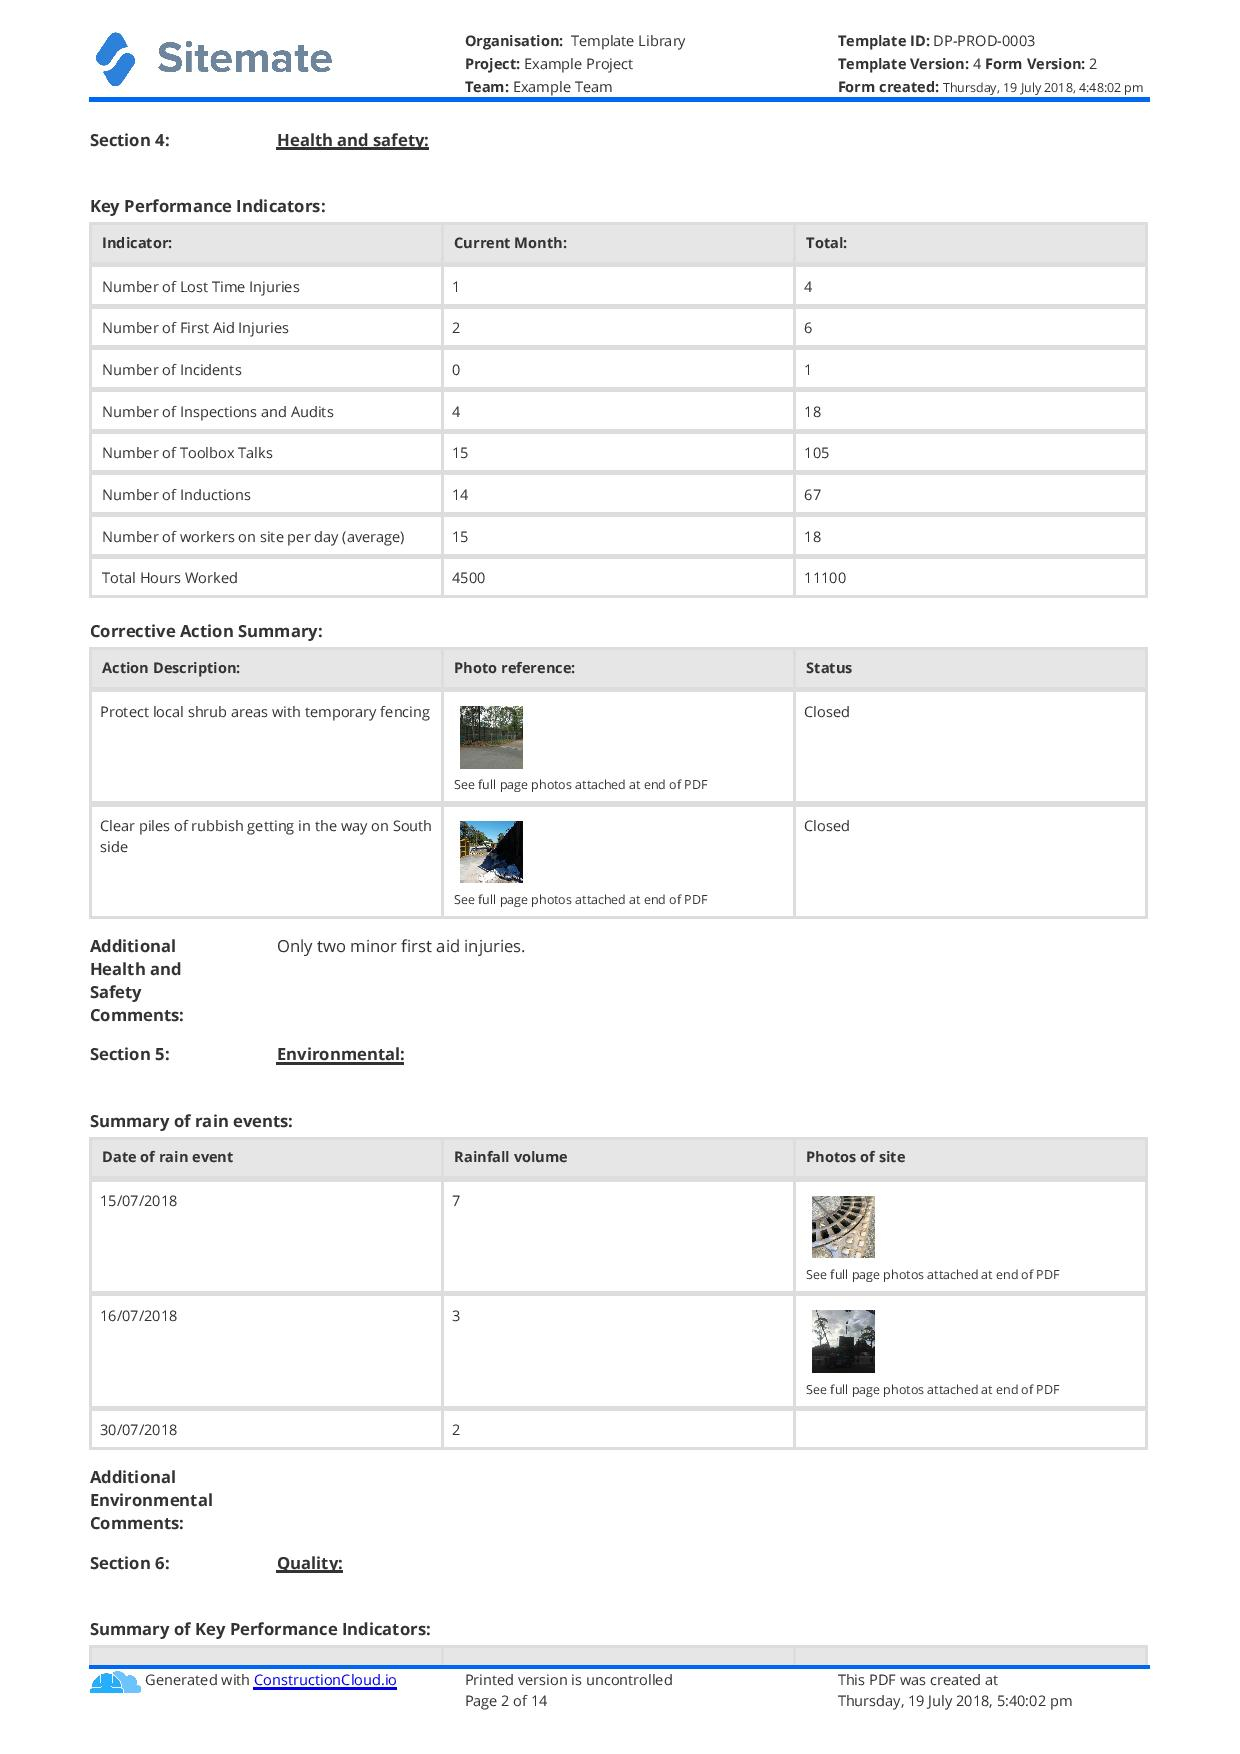 Monthly Construction Progress Report Template: Use This Regarding Monthly Activity Report Template